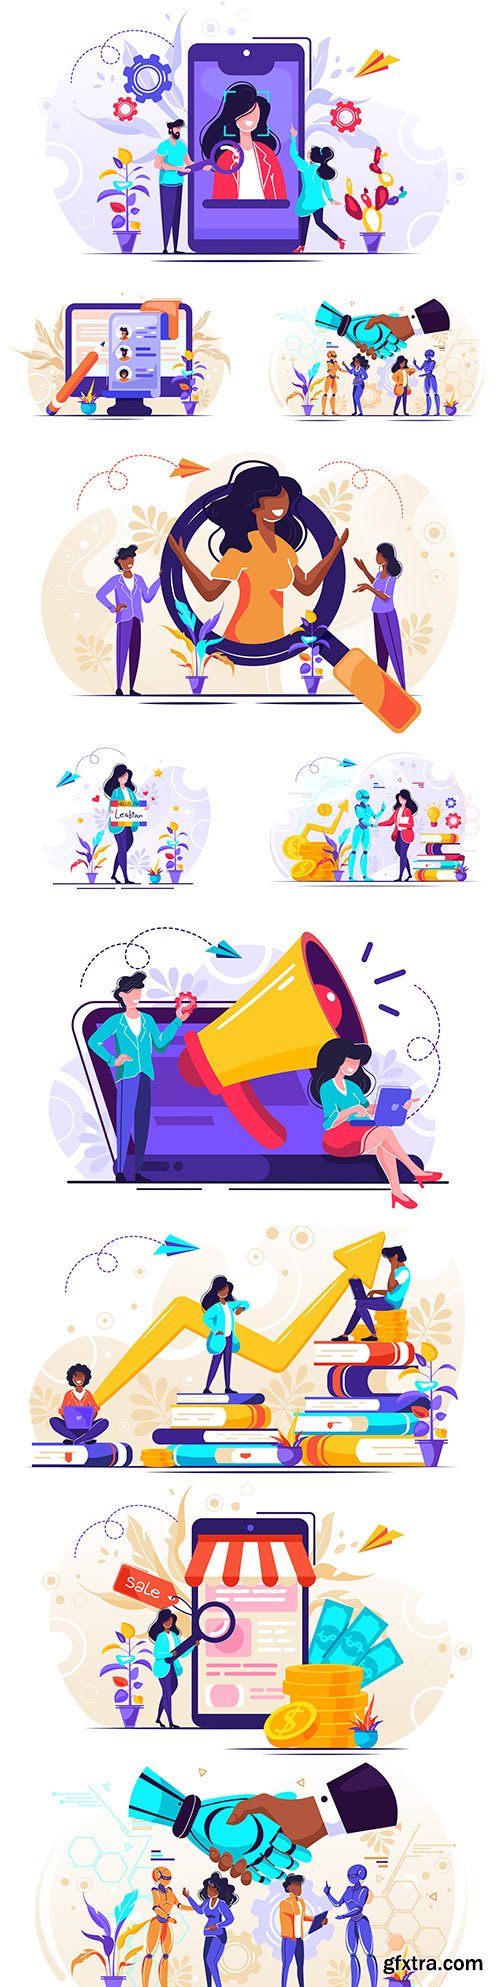 Online store and banking concept illustration